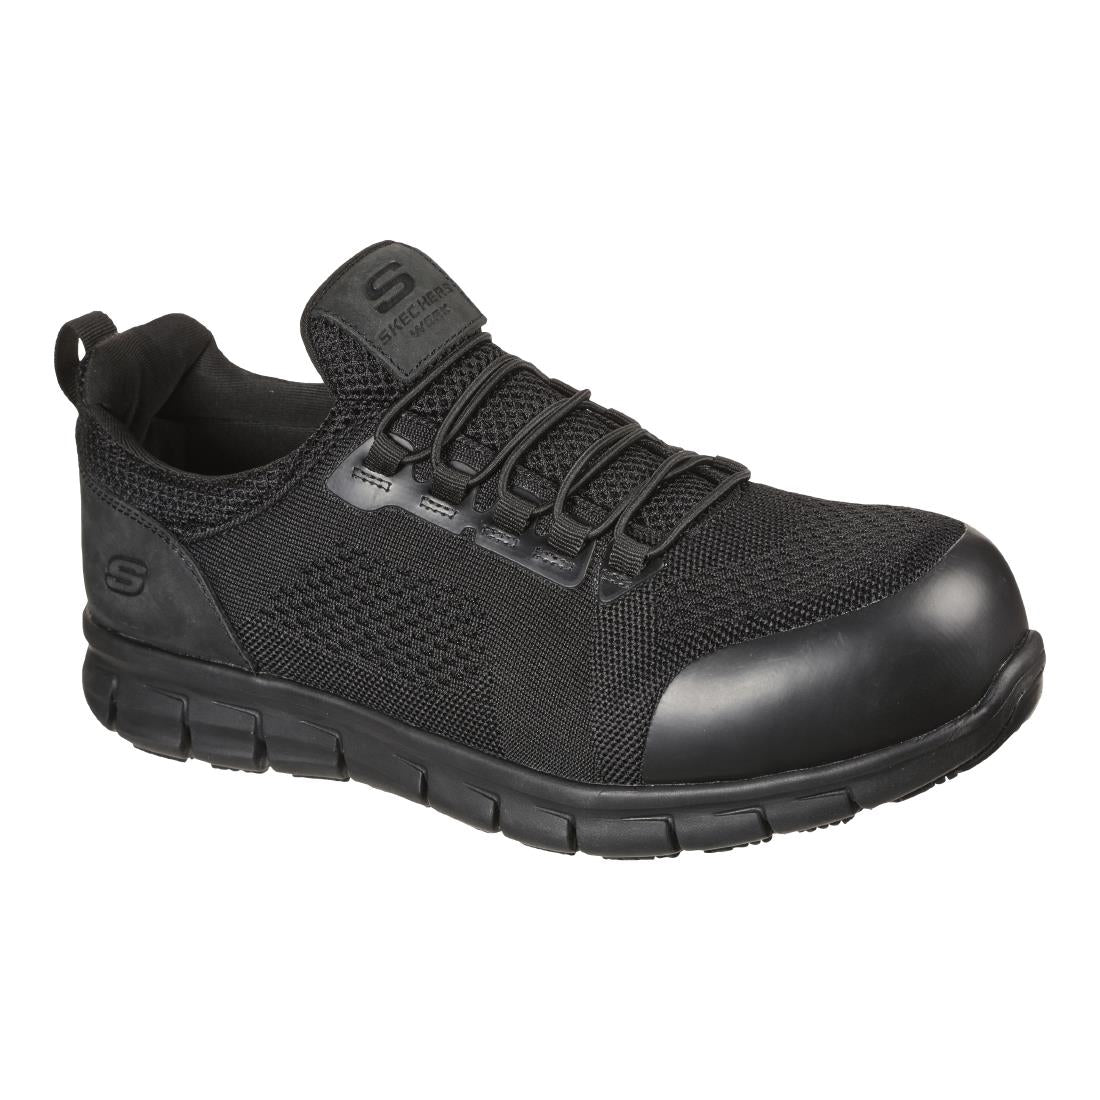 BB675-41 Skechers Safety Shoe with Steel Toe Cap Size 41 JD Catering Equipment Solutions Ltd